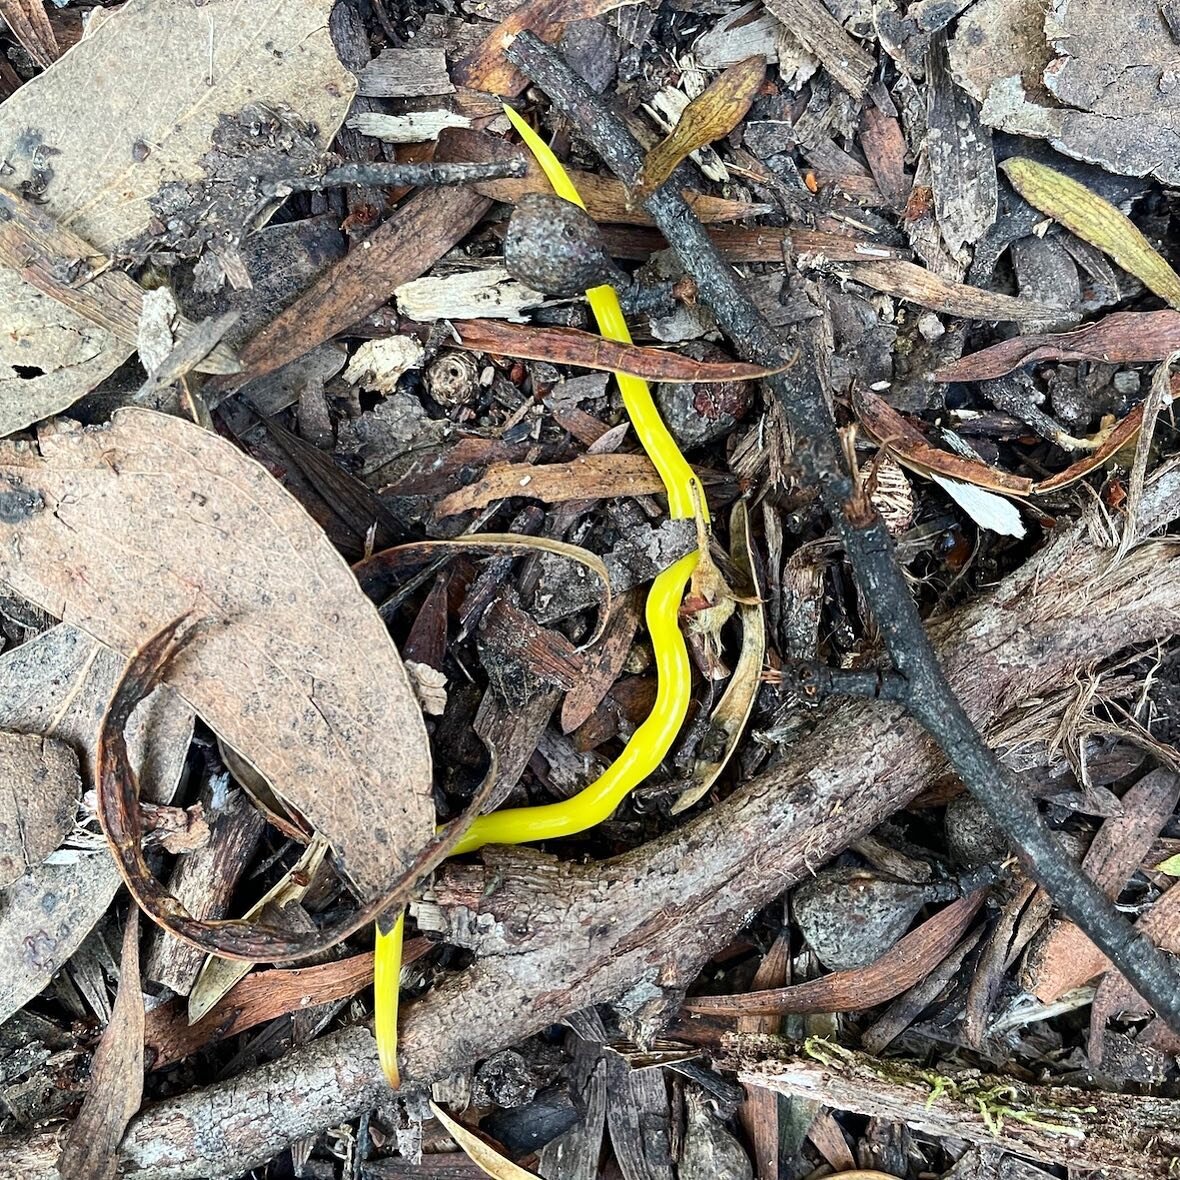 Hi-viz worm! (Canary Worm, Fletchamia sugdeni). This one spotted in Tassie, but also found in southern Victoria.